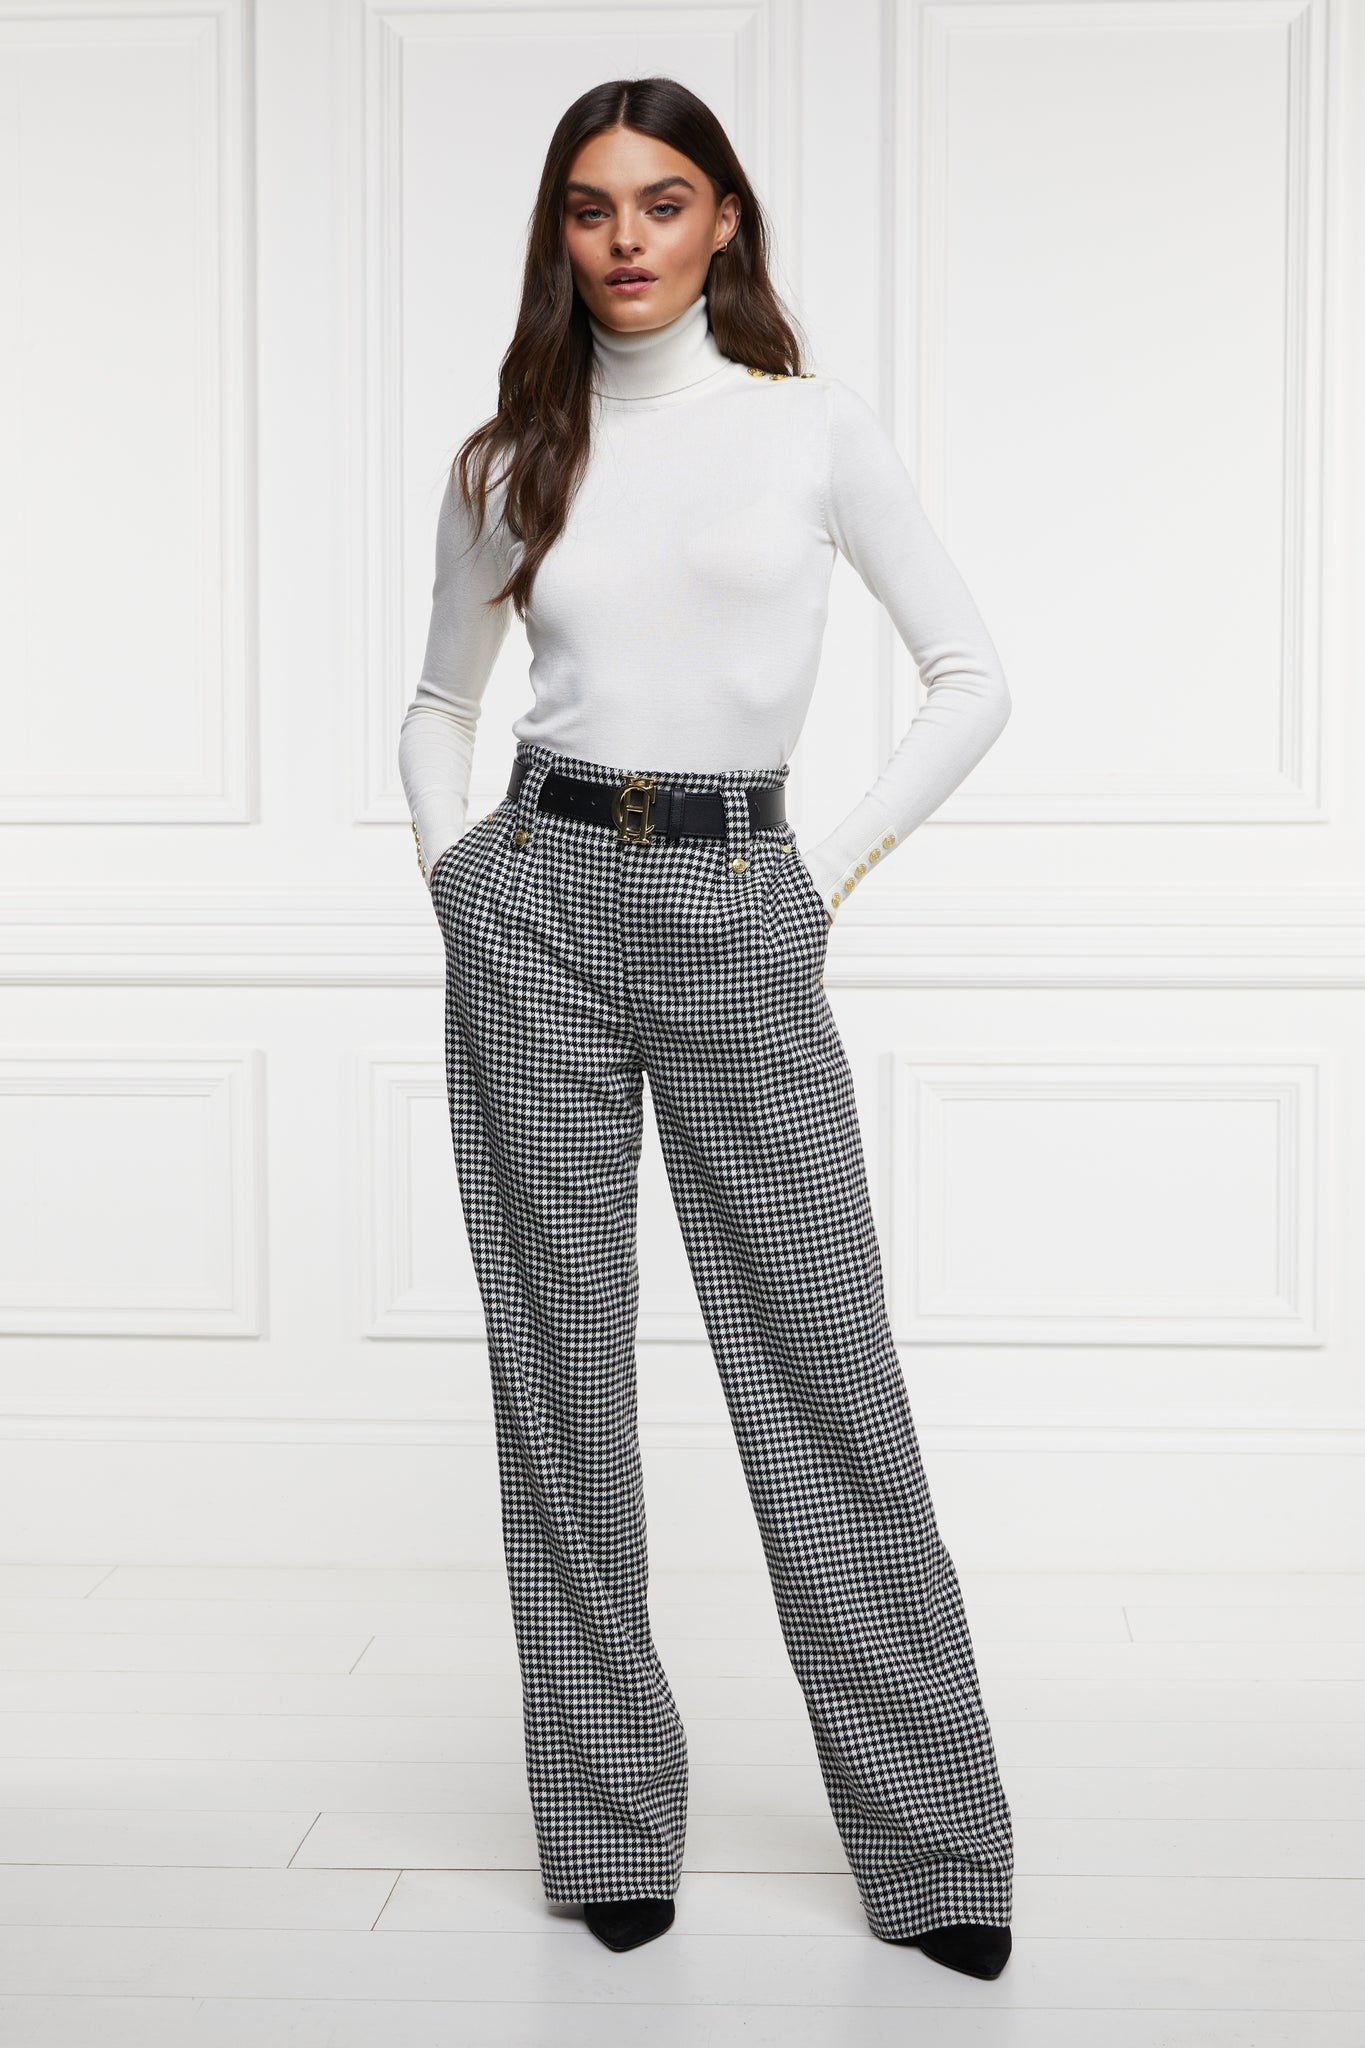 The Houndstooth Pants